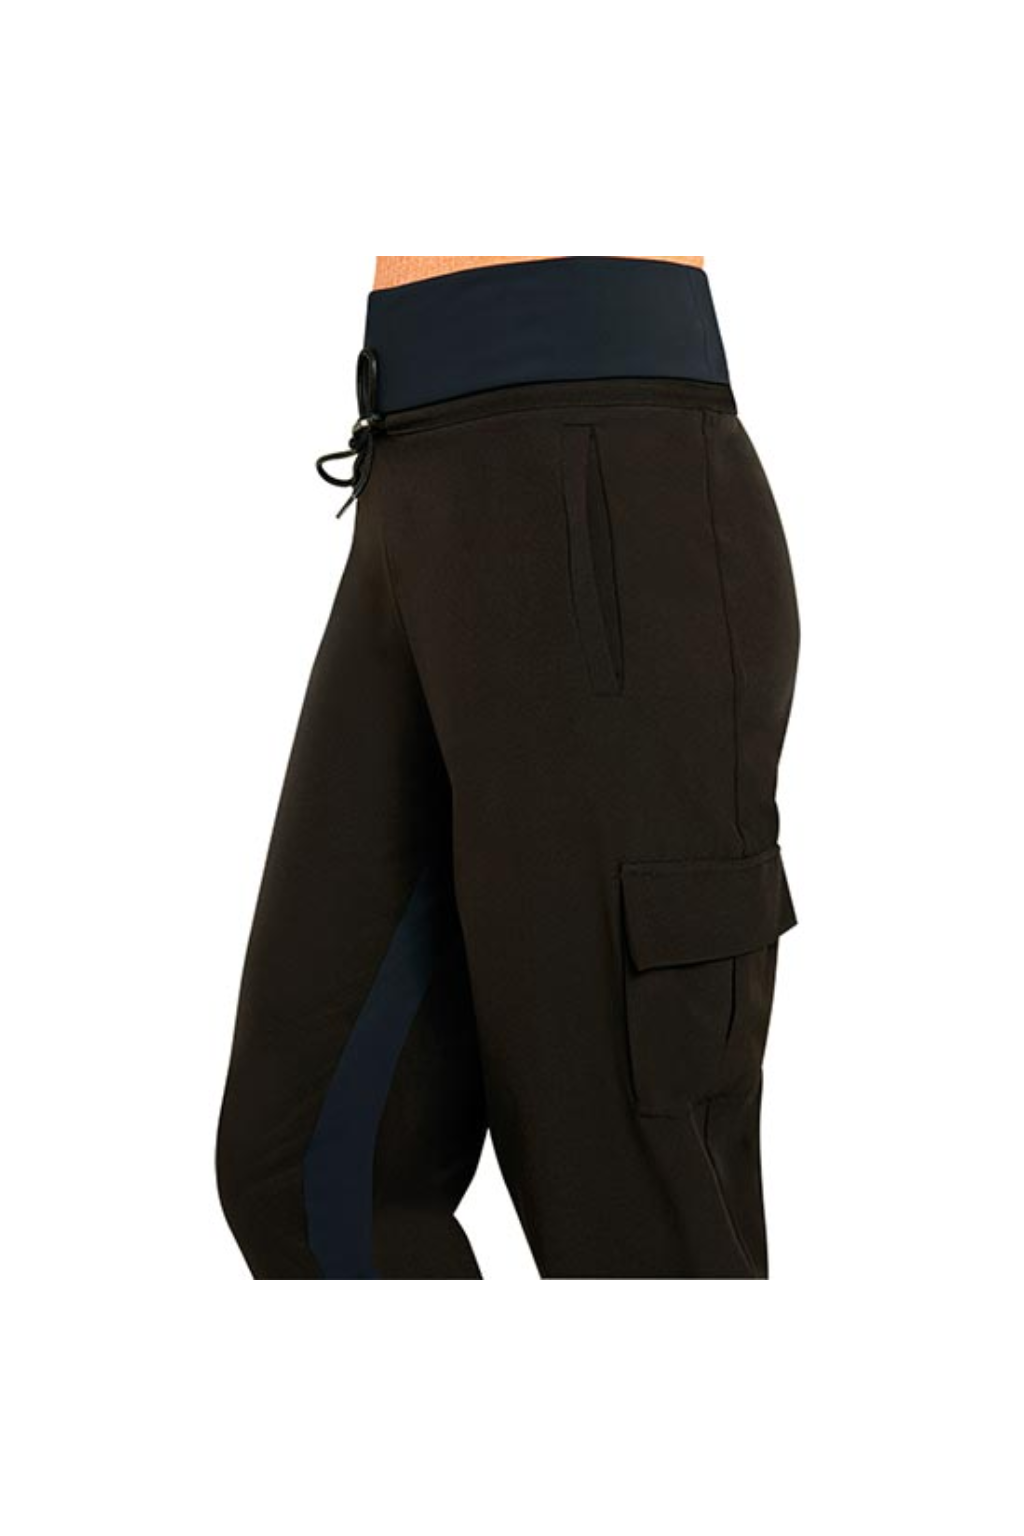 Extremely Comfortable Jogging Pants